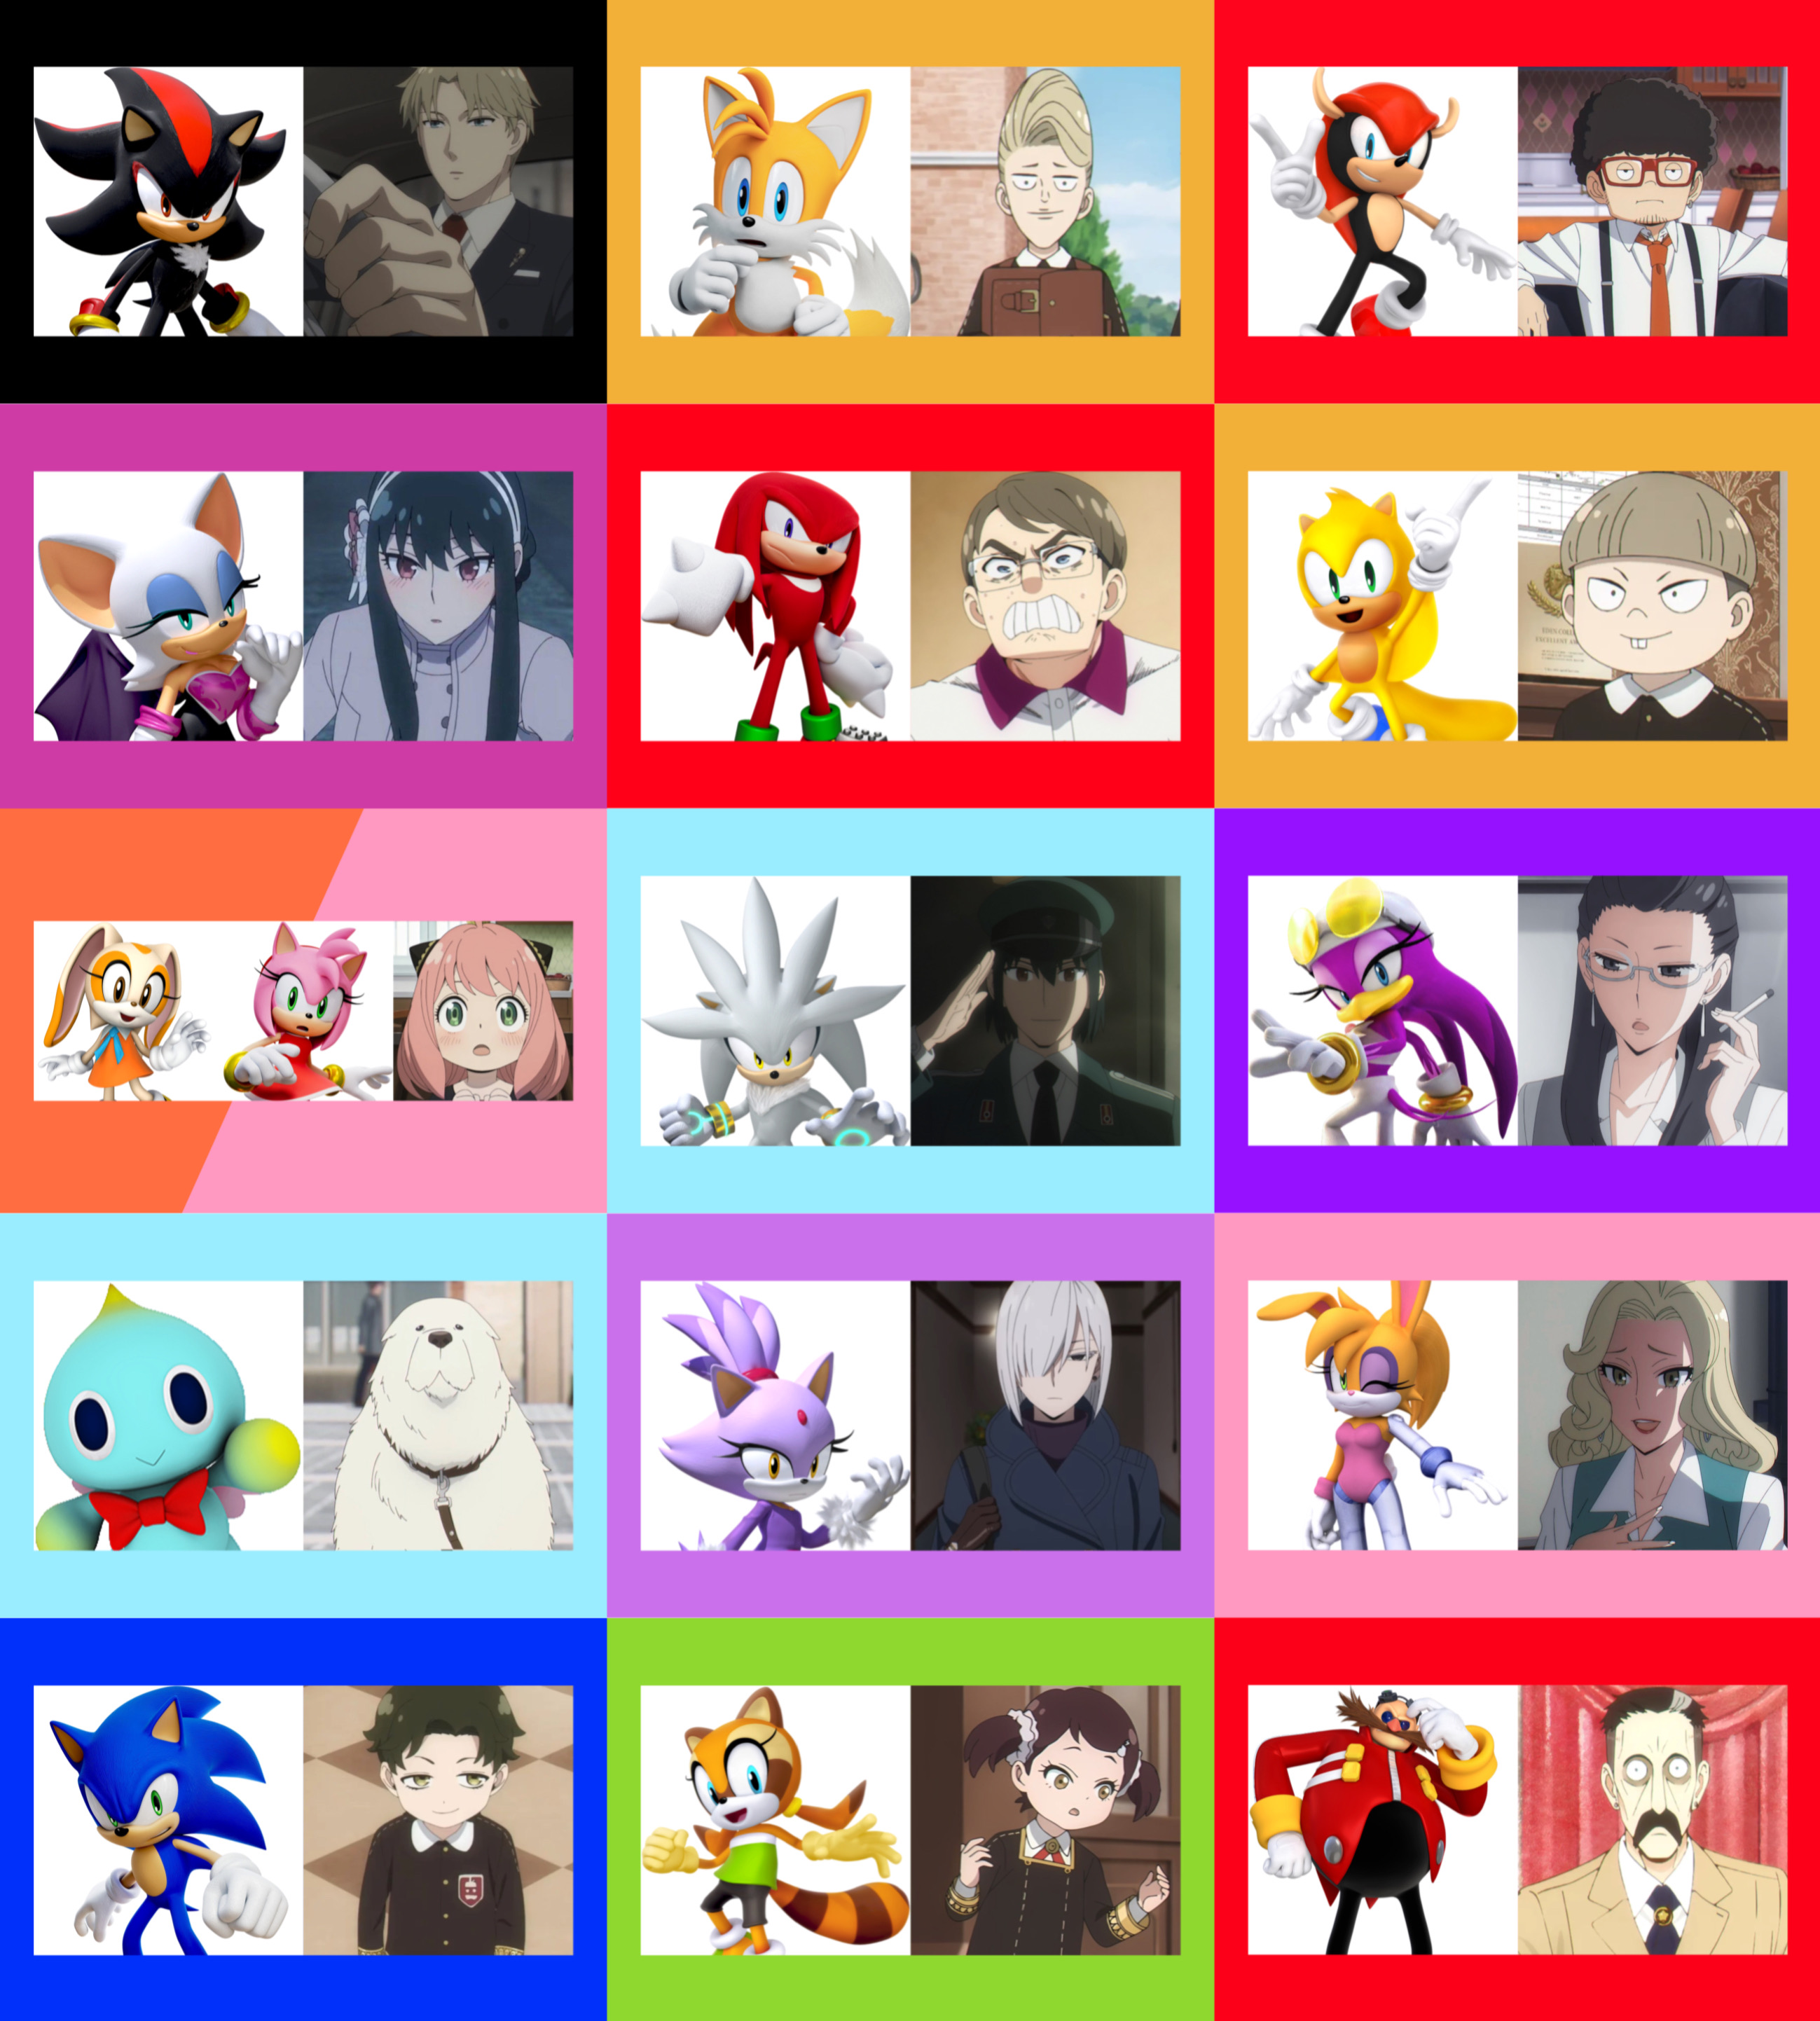 Sonic characters as Spy X Family characters